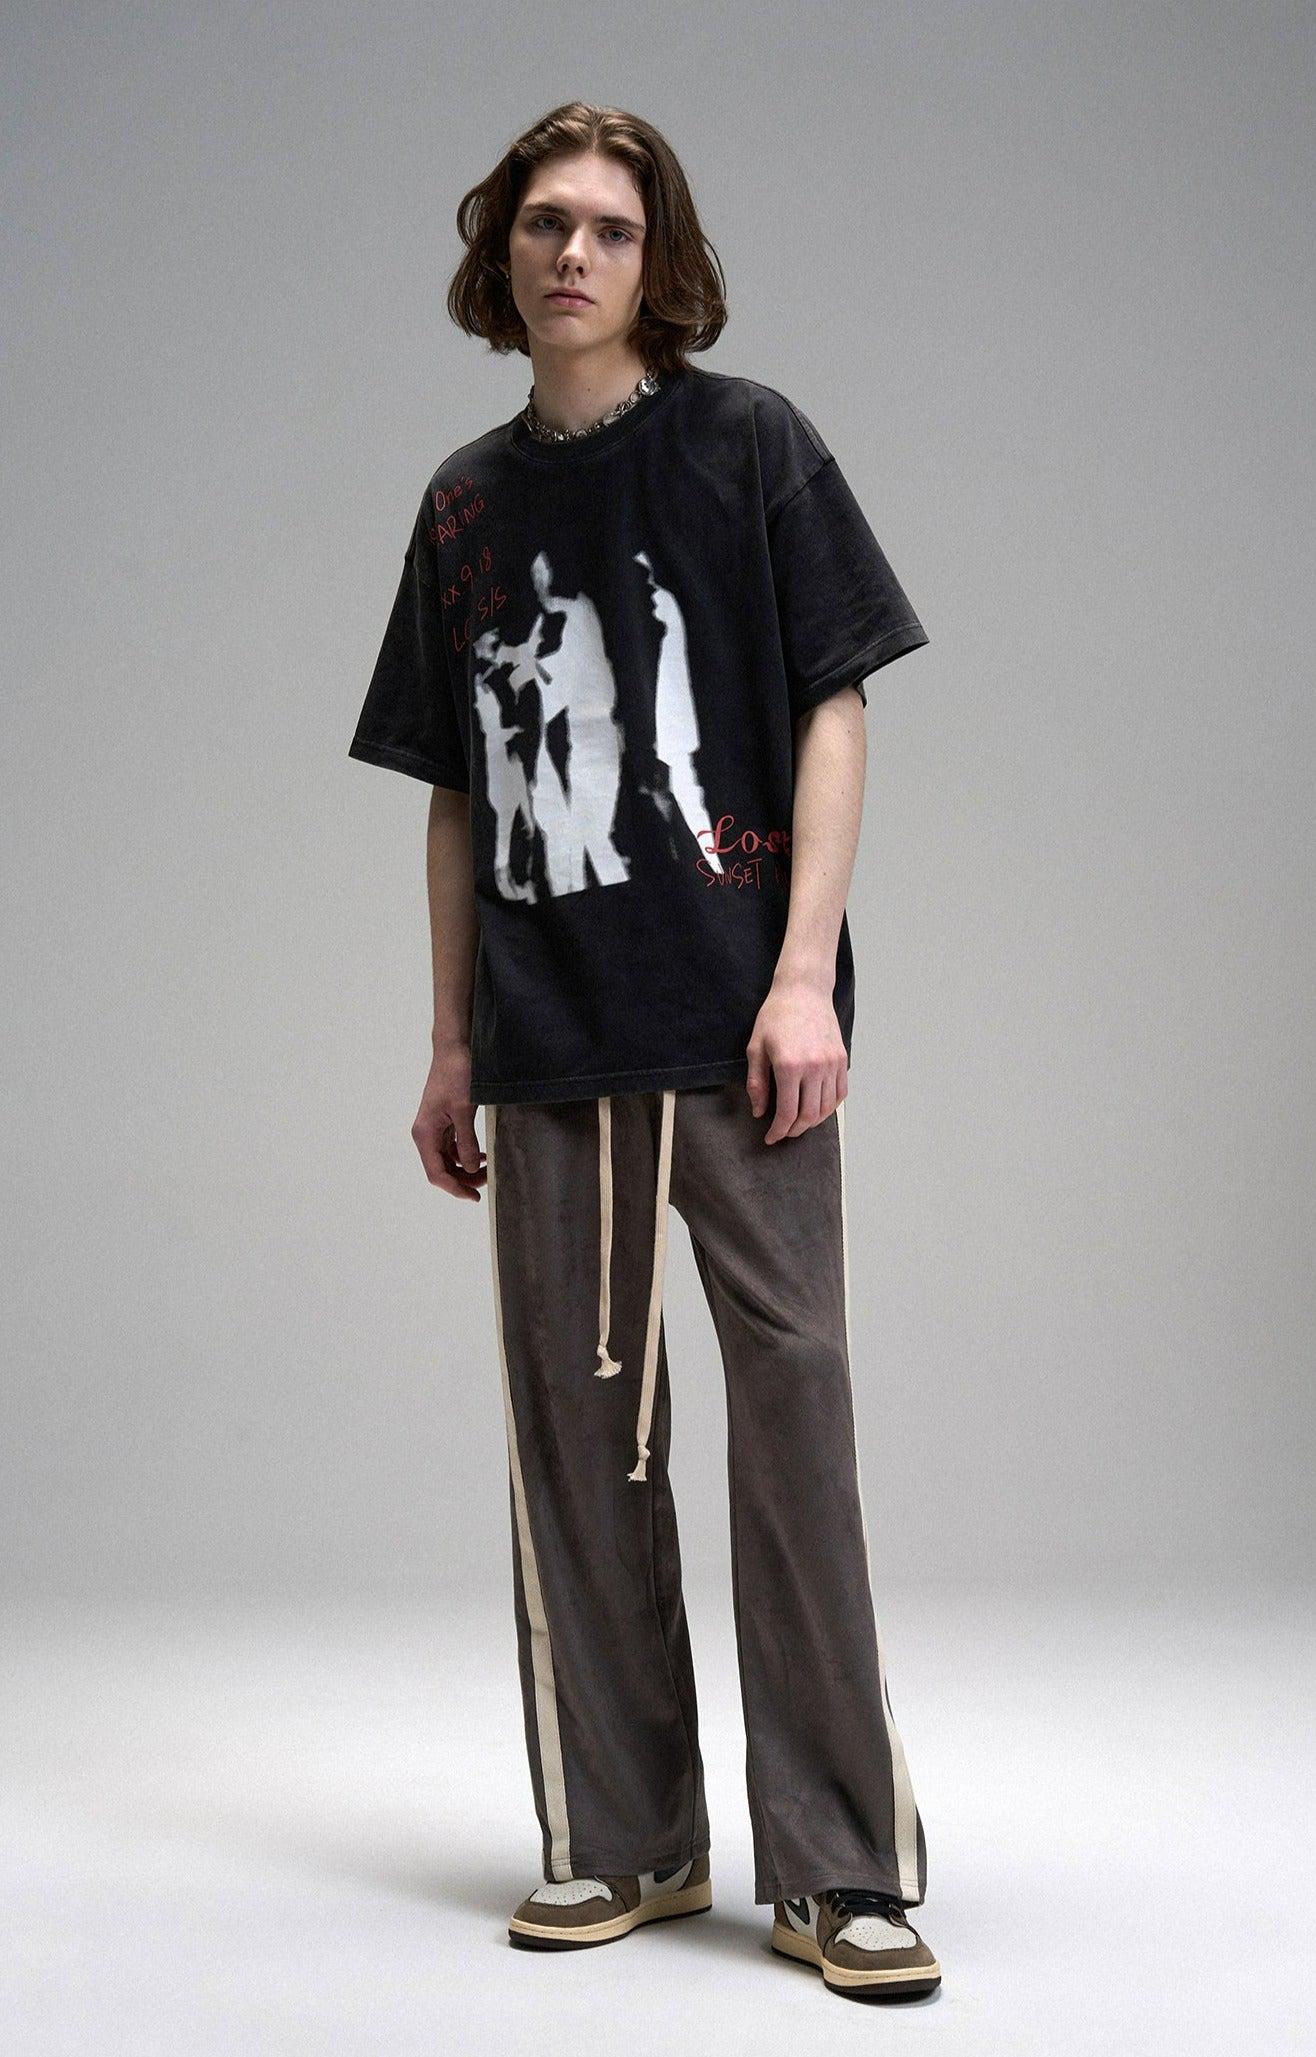 Mohe Ballroom Graphic T-Shirt Korean Street Fashion T-Shirt By Lost CTRL Shop Online at OH Vault